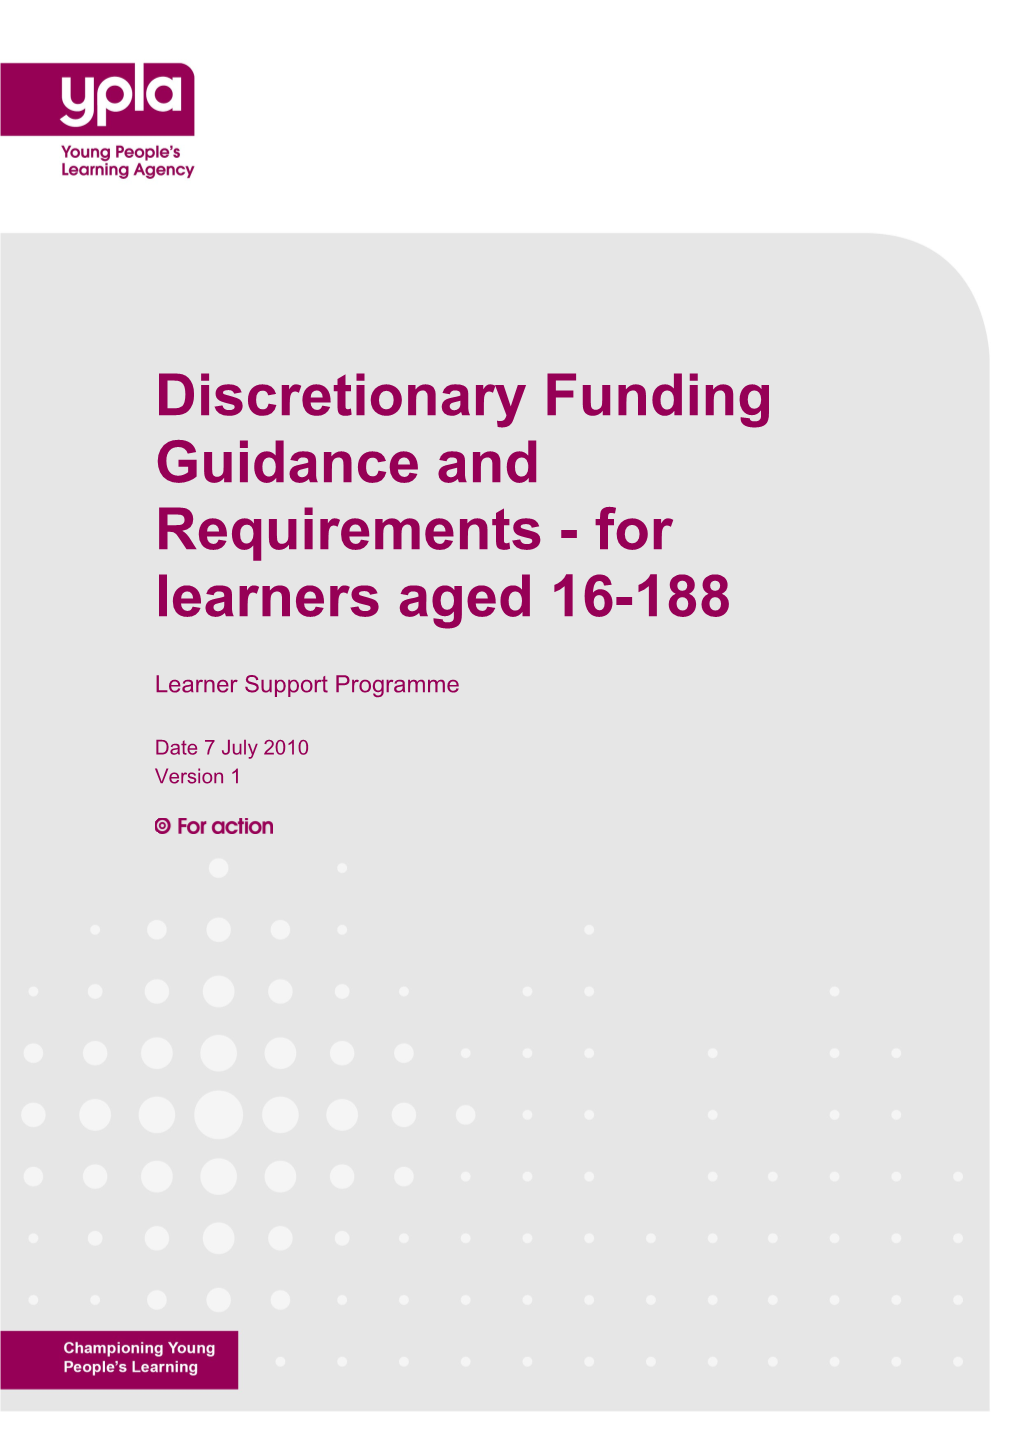 Discretionary Funding Guidance and Requirements - for Learners Aged 16-18